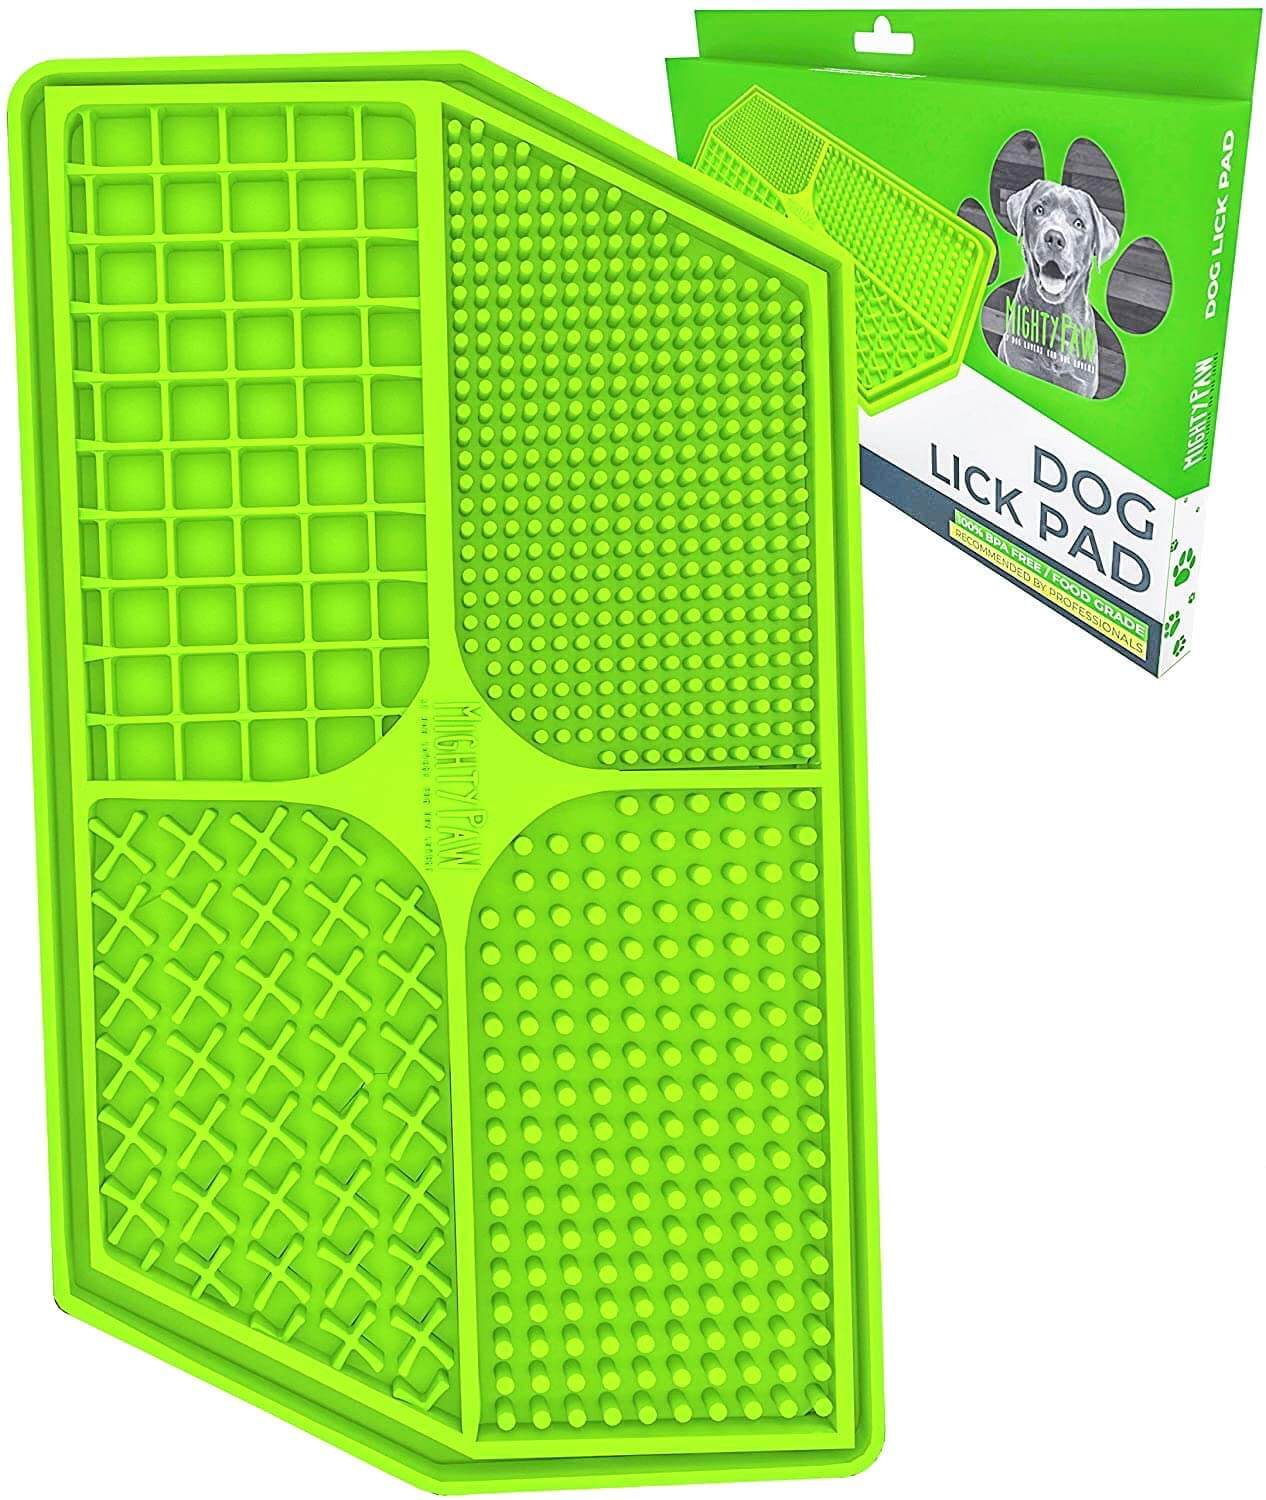 Best Lick Mats for Dogs